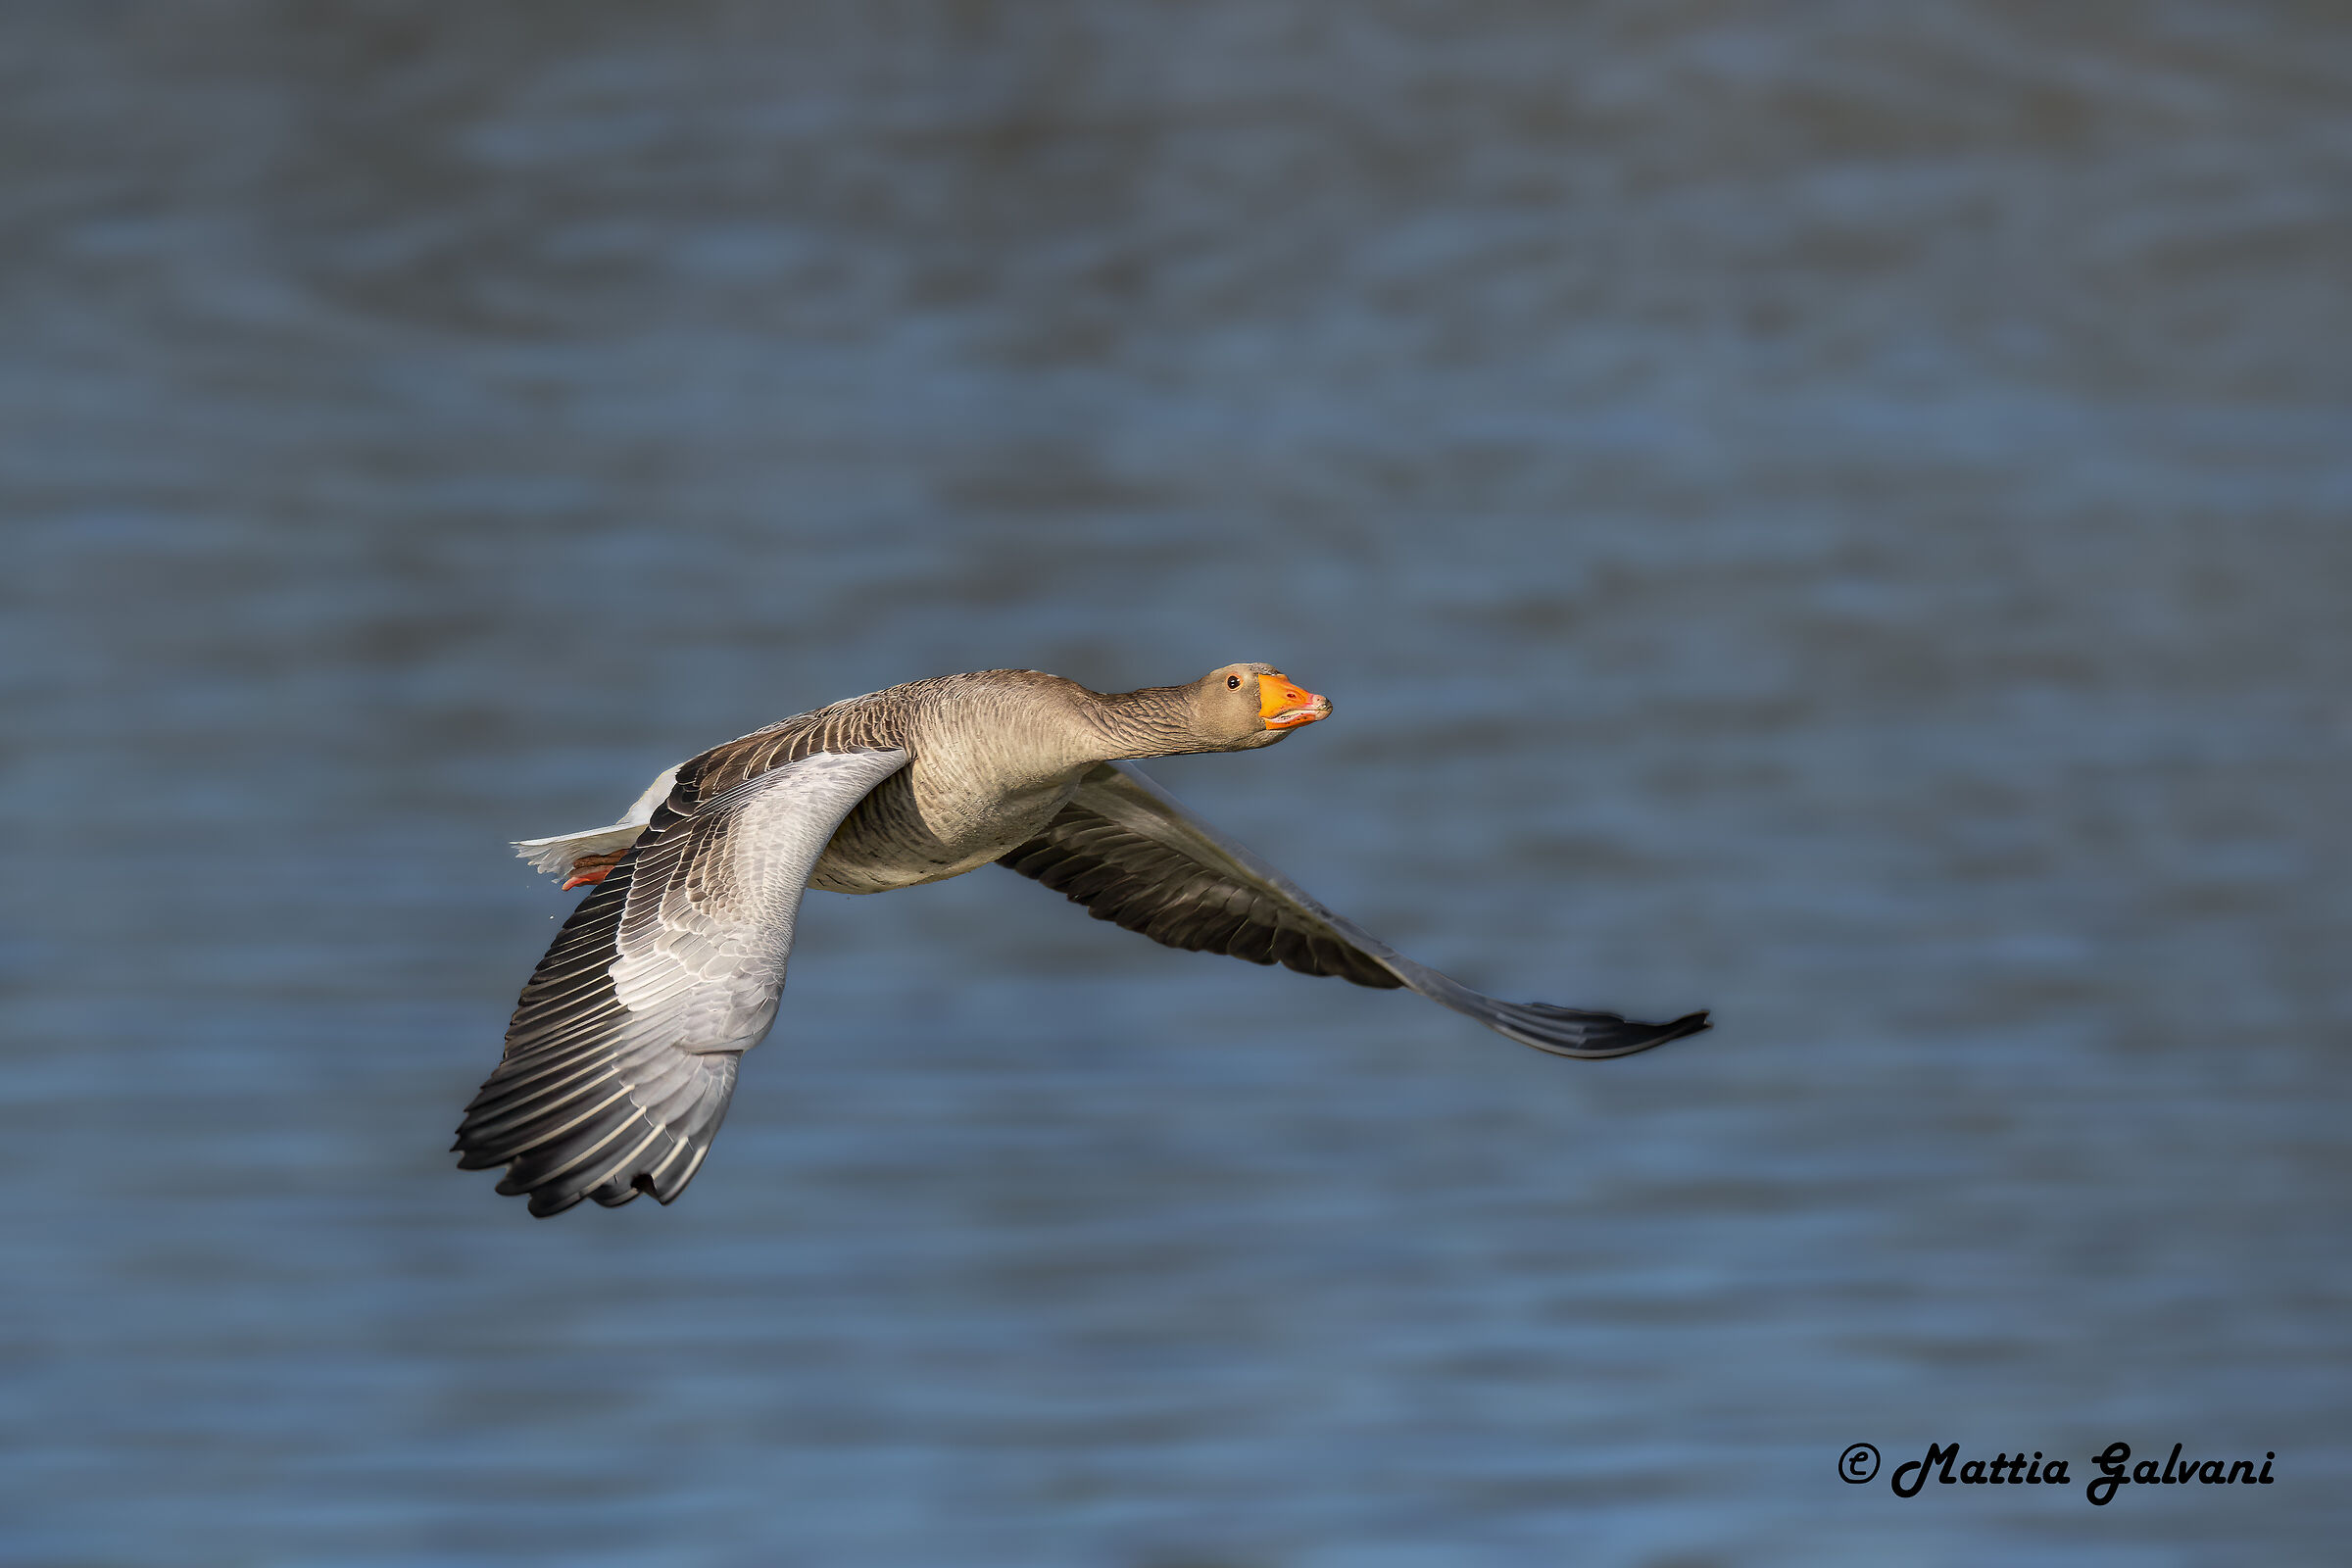 The take-off of the wild goose...